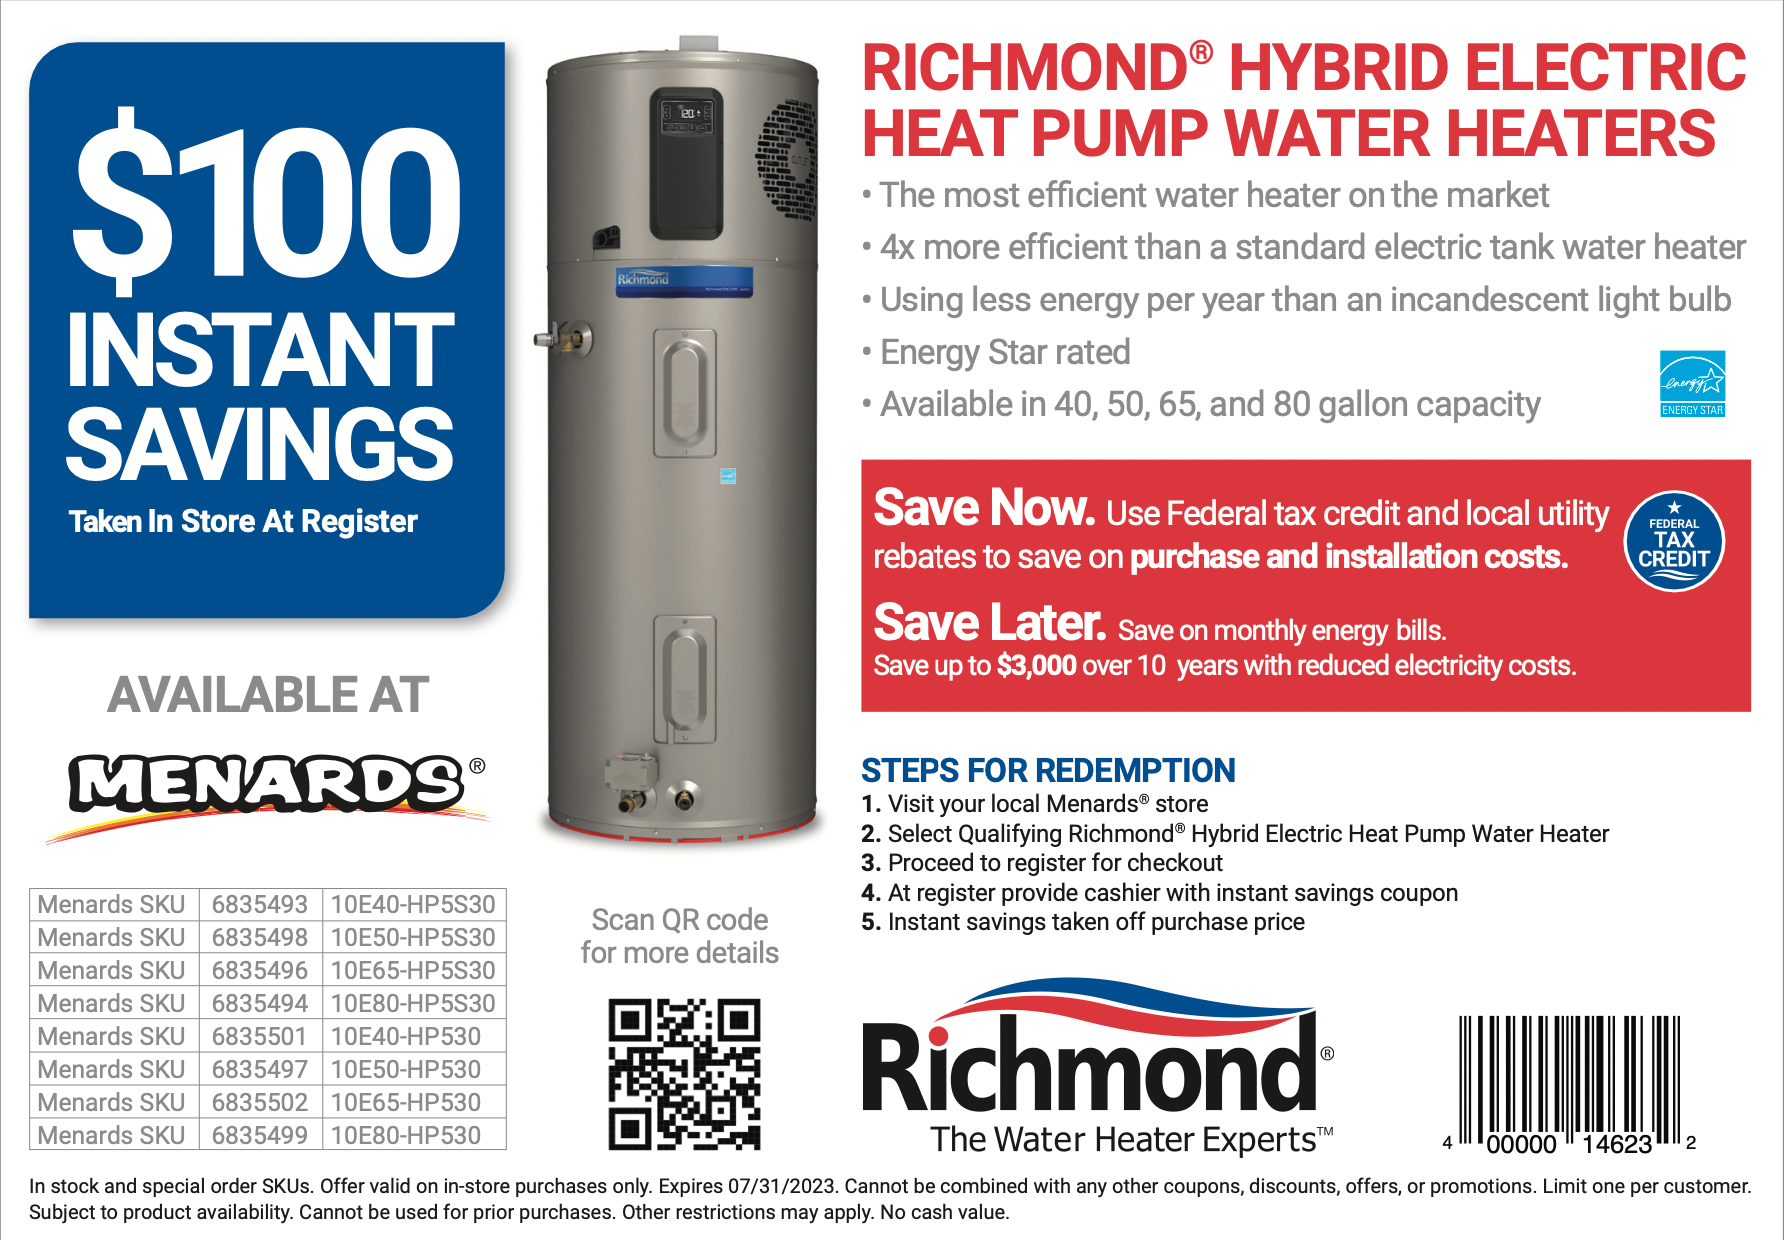 Menards Coupon for Richmond Hybrid Electric Heat Pump Water Heater